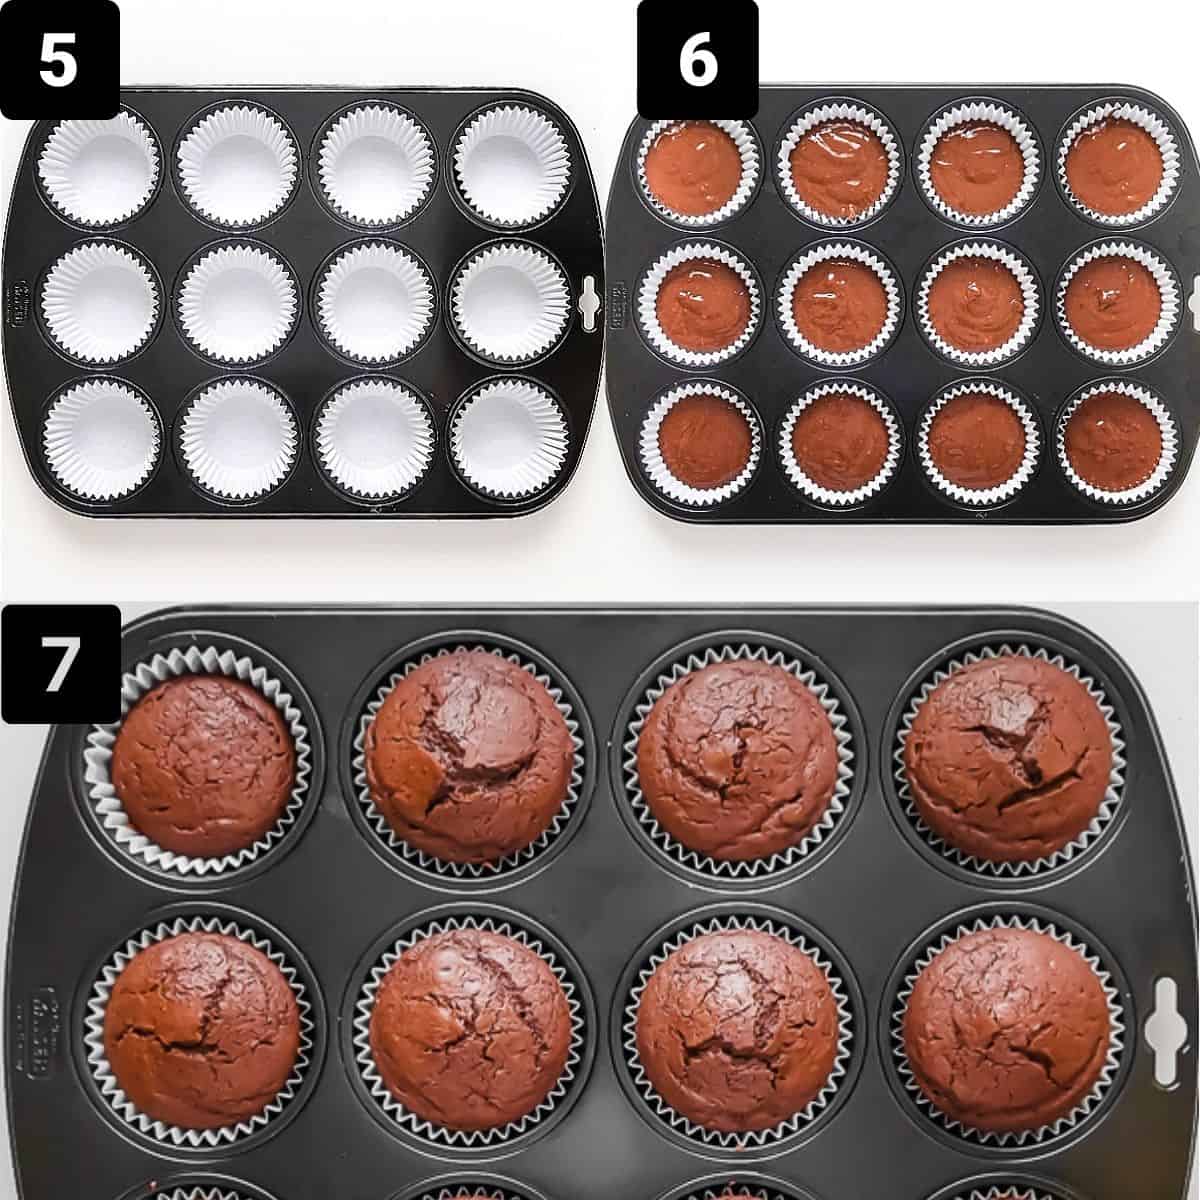 Step by step to make cupcakes: line muffin pan, fill liners, bake.